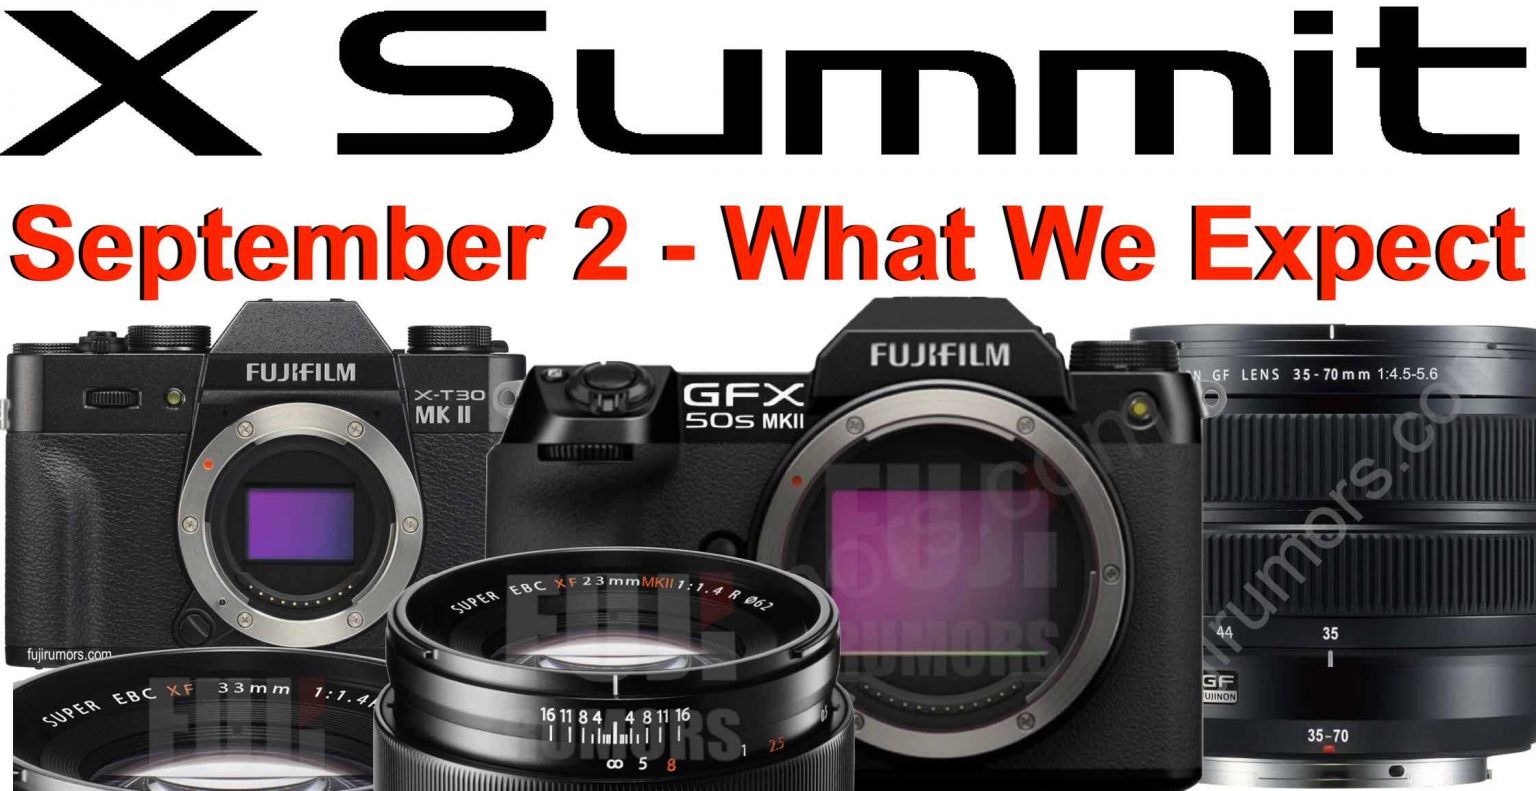 Full List of What We Expect to be Announced at Fujifilm X Summit on